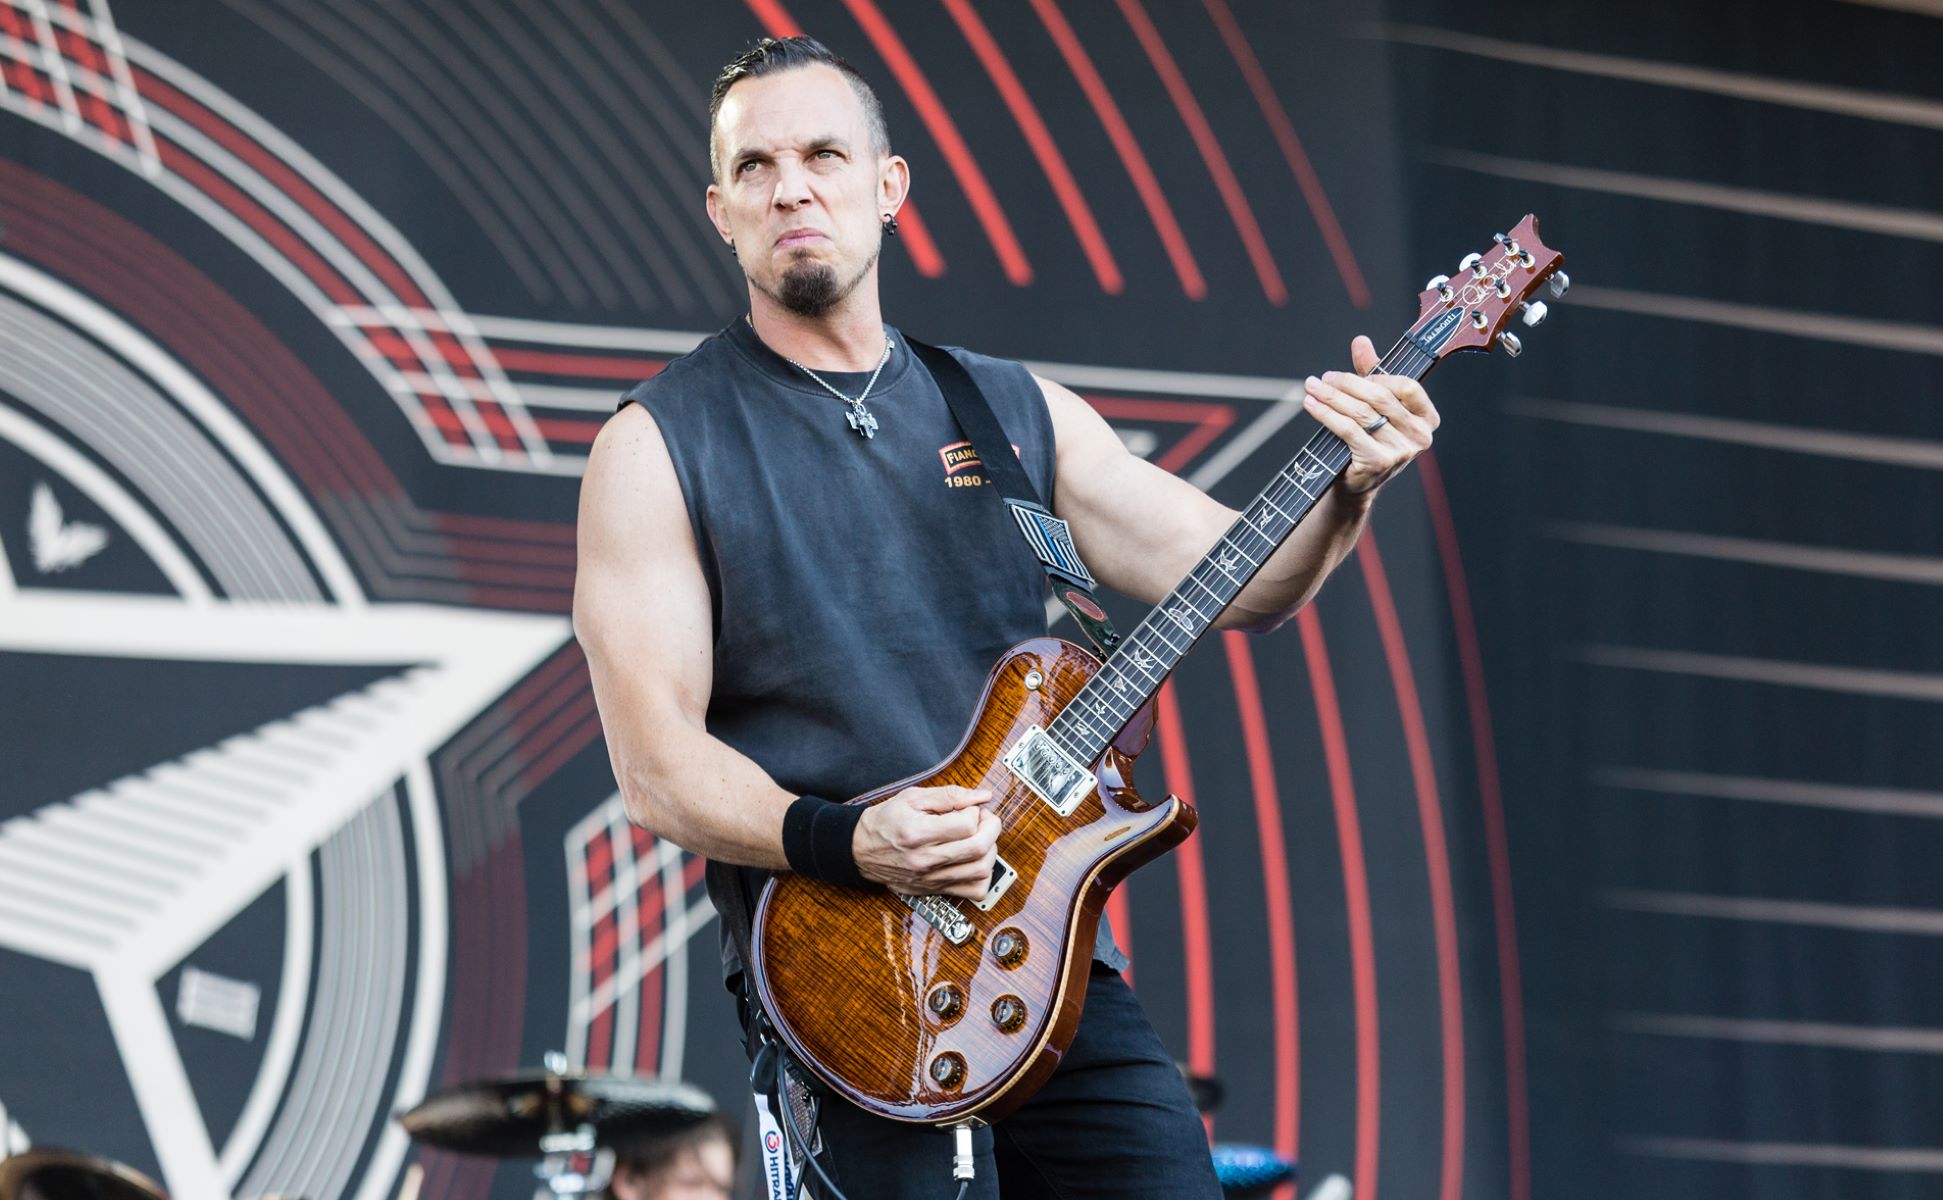 16 Fascinating Facts About Mark Tremonti - Facts.net